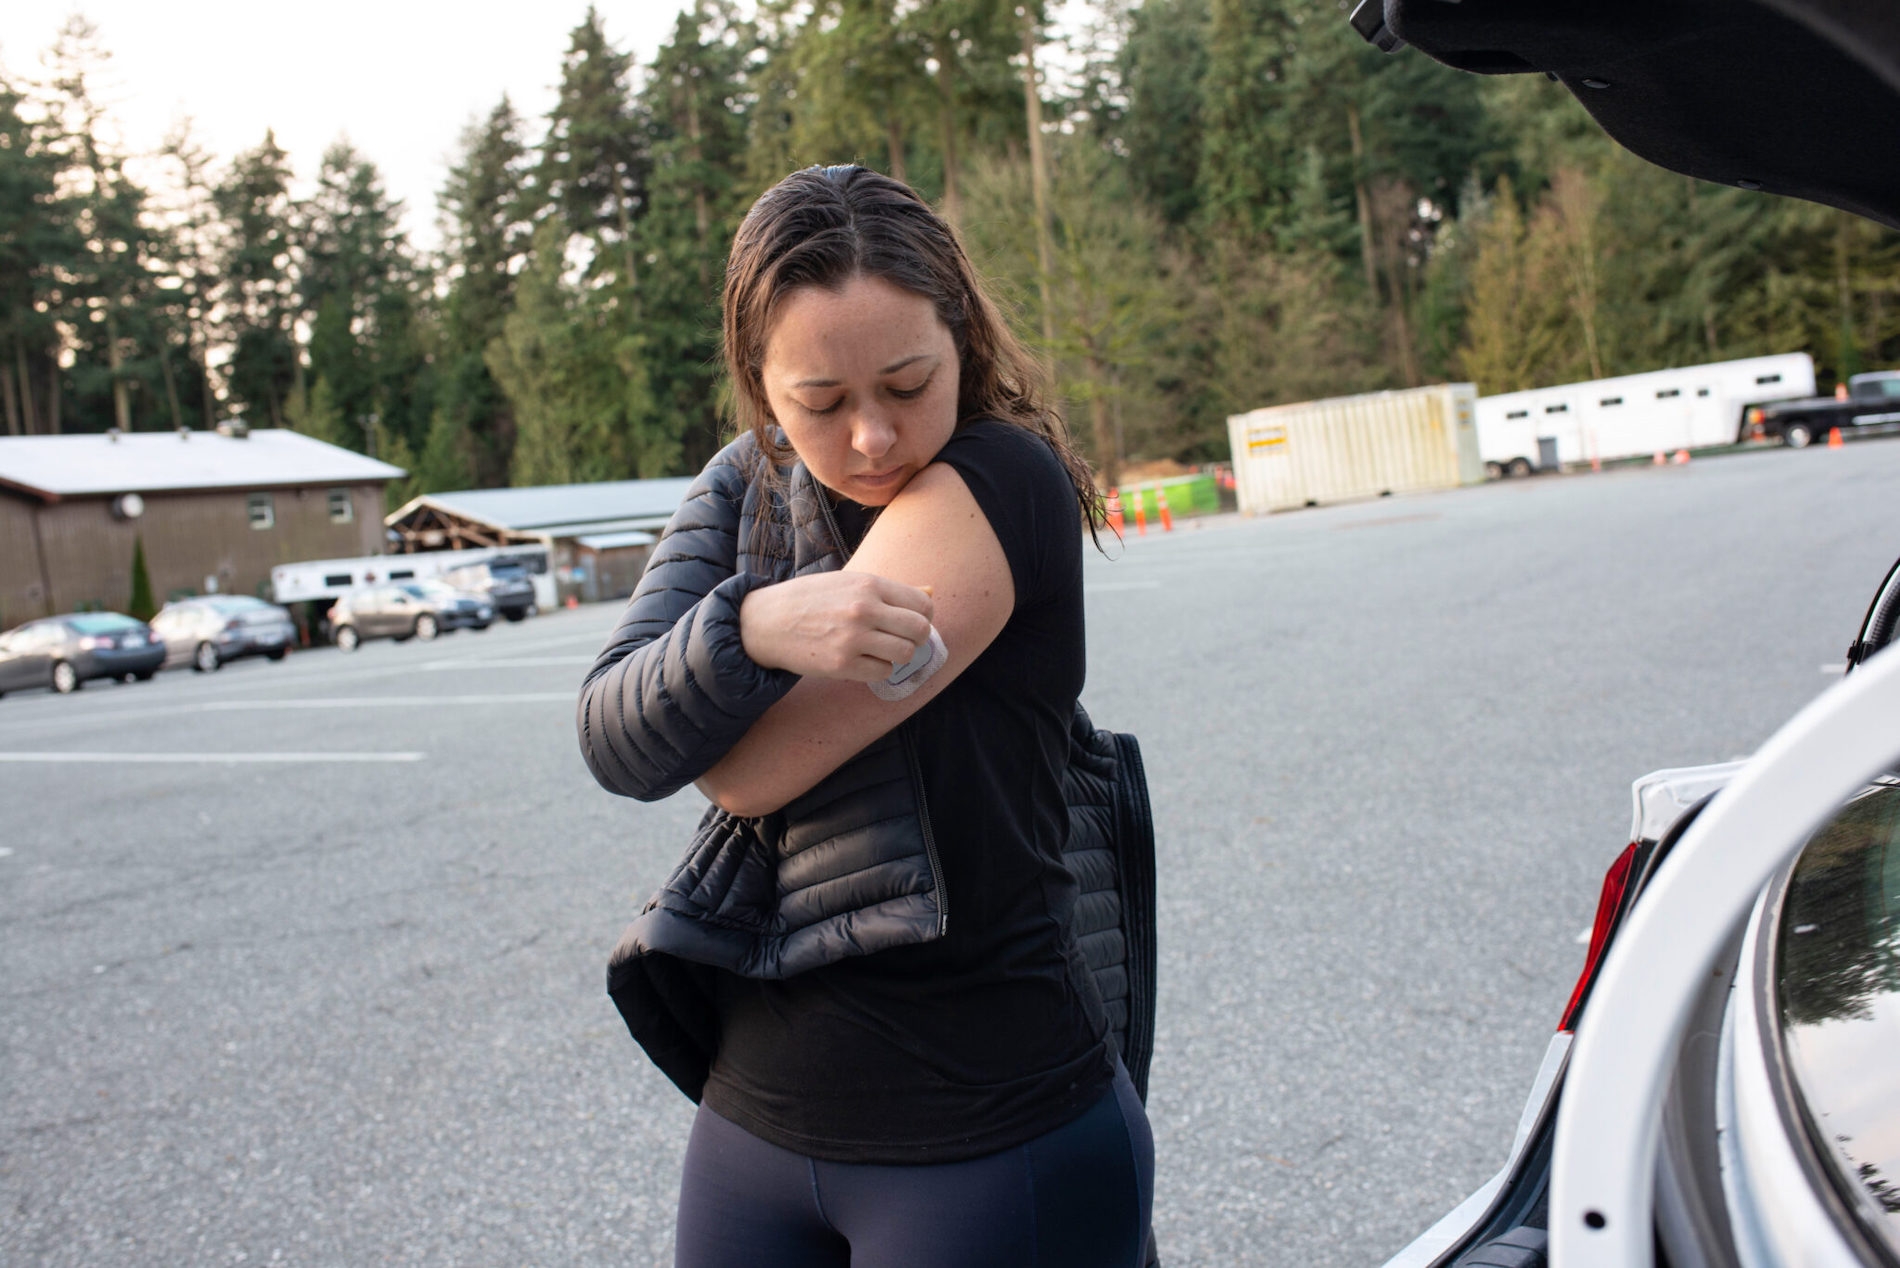 A woman in black puts a patch on her arm in a parking lot surrounded by trees.